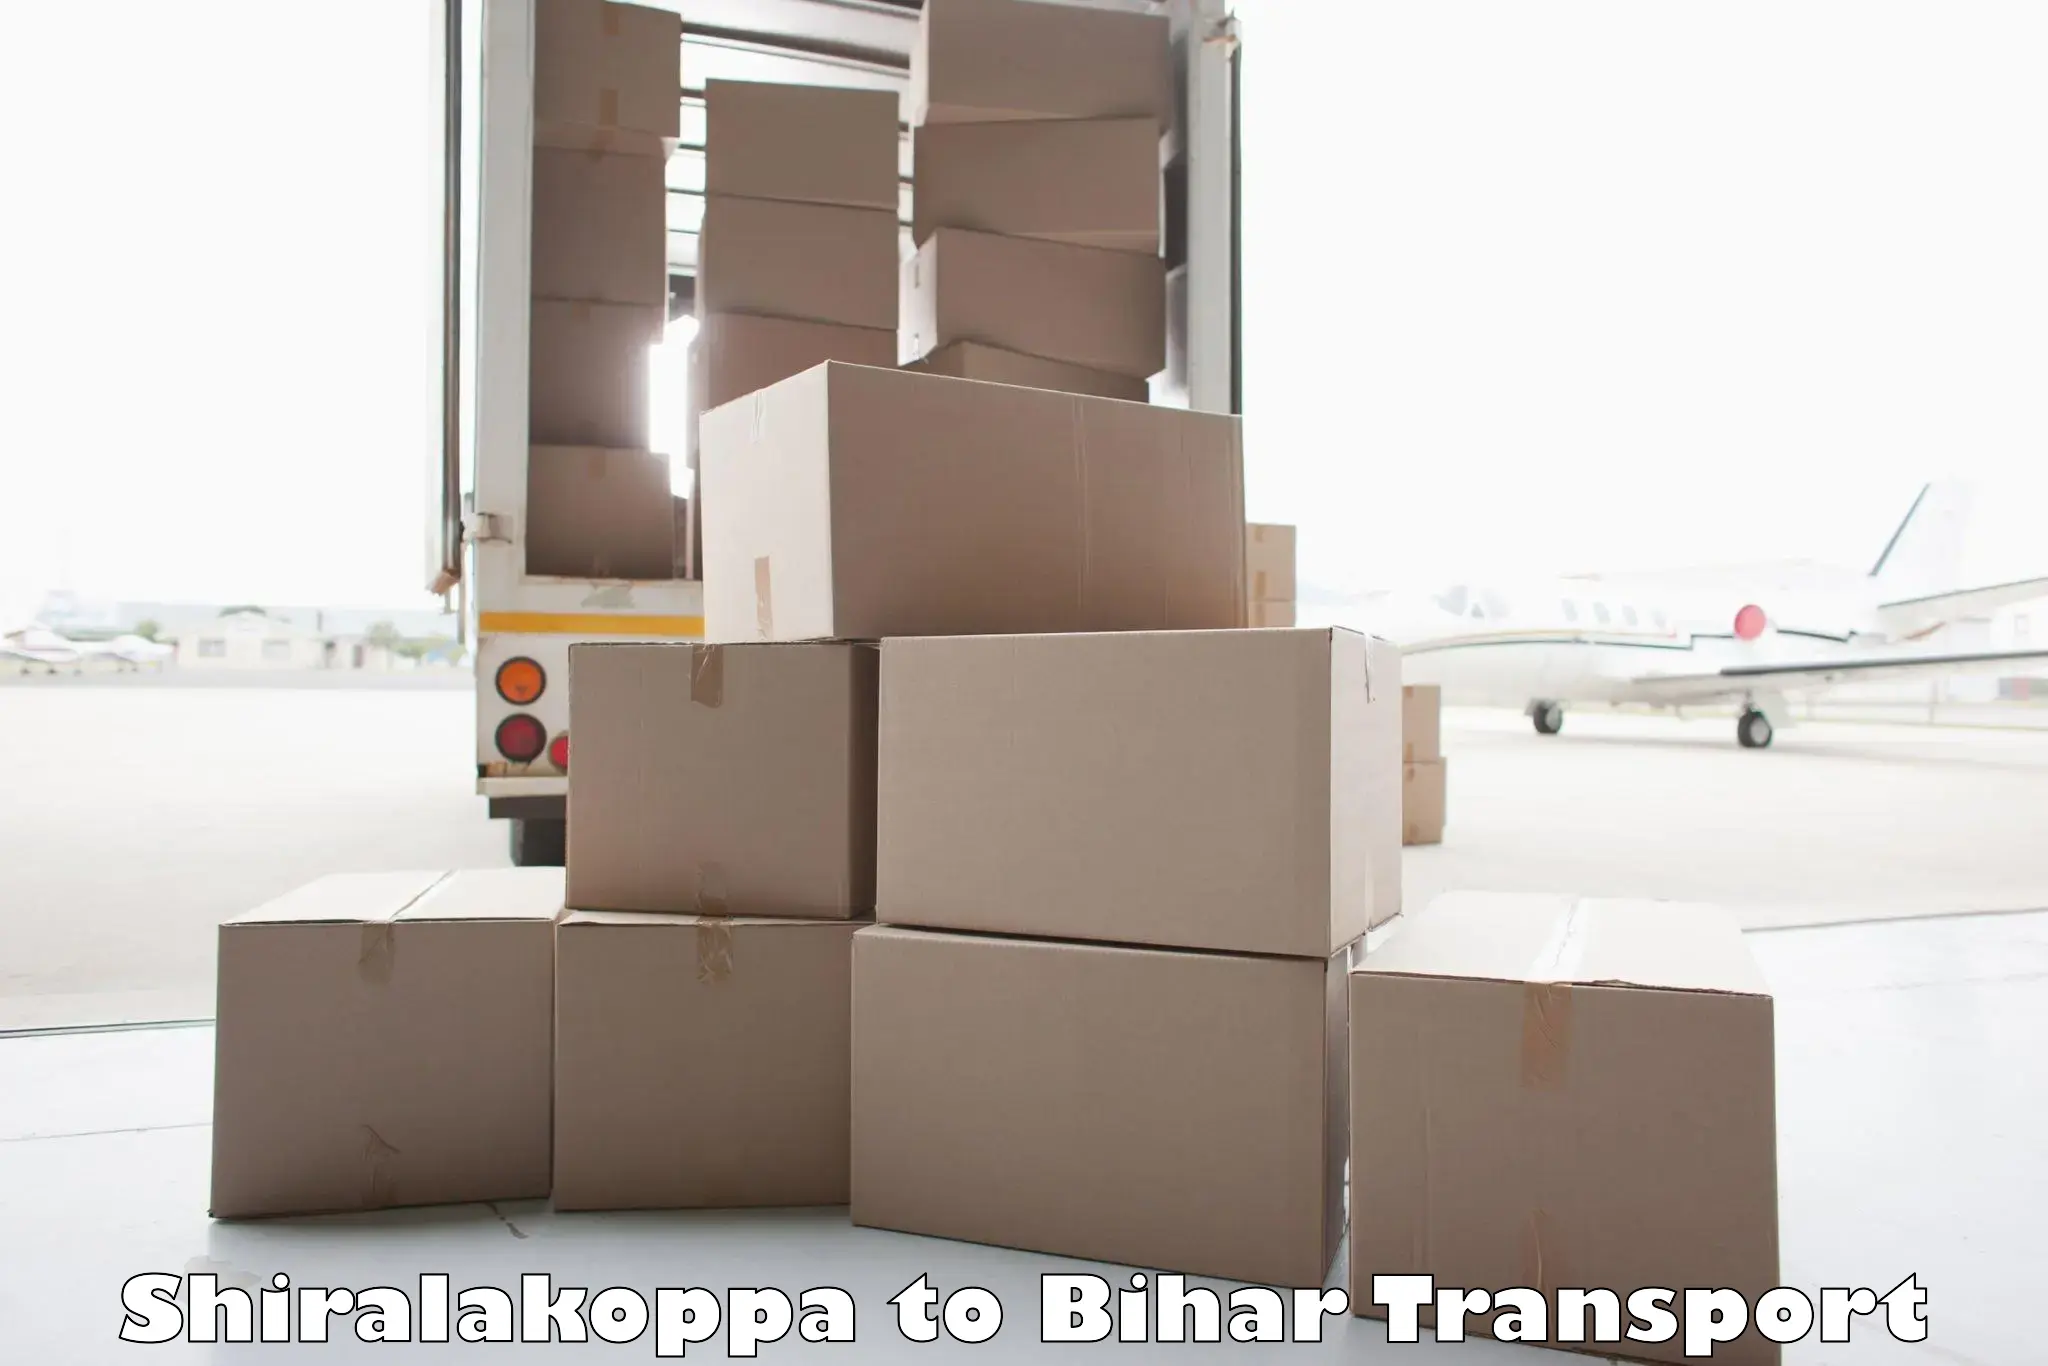 Parcel transport services Shiralakoppa to Kamtaul